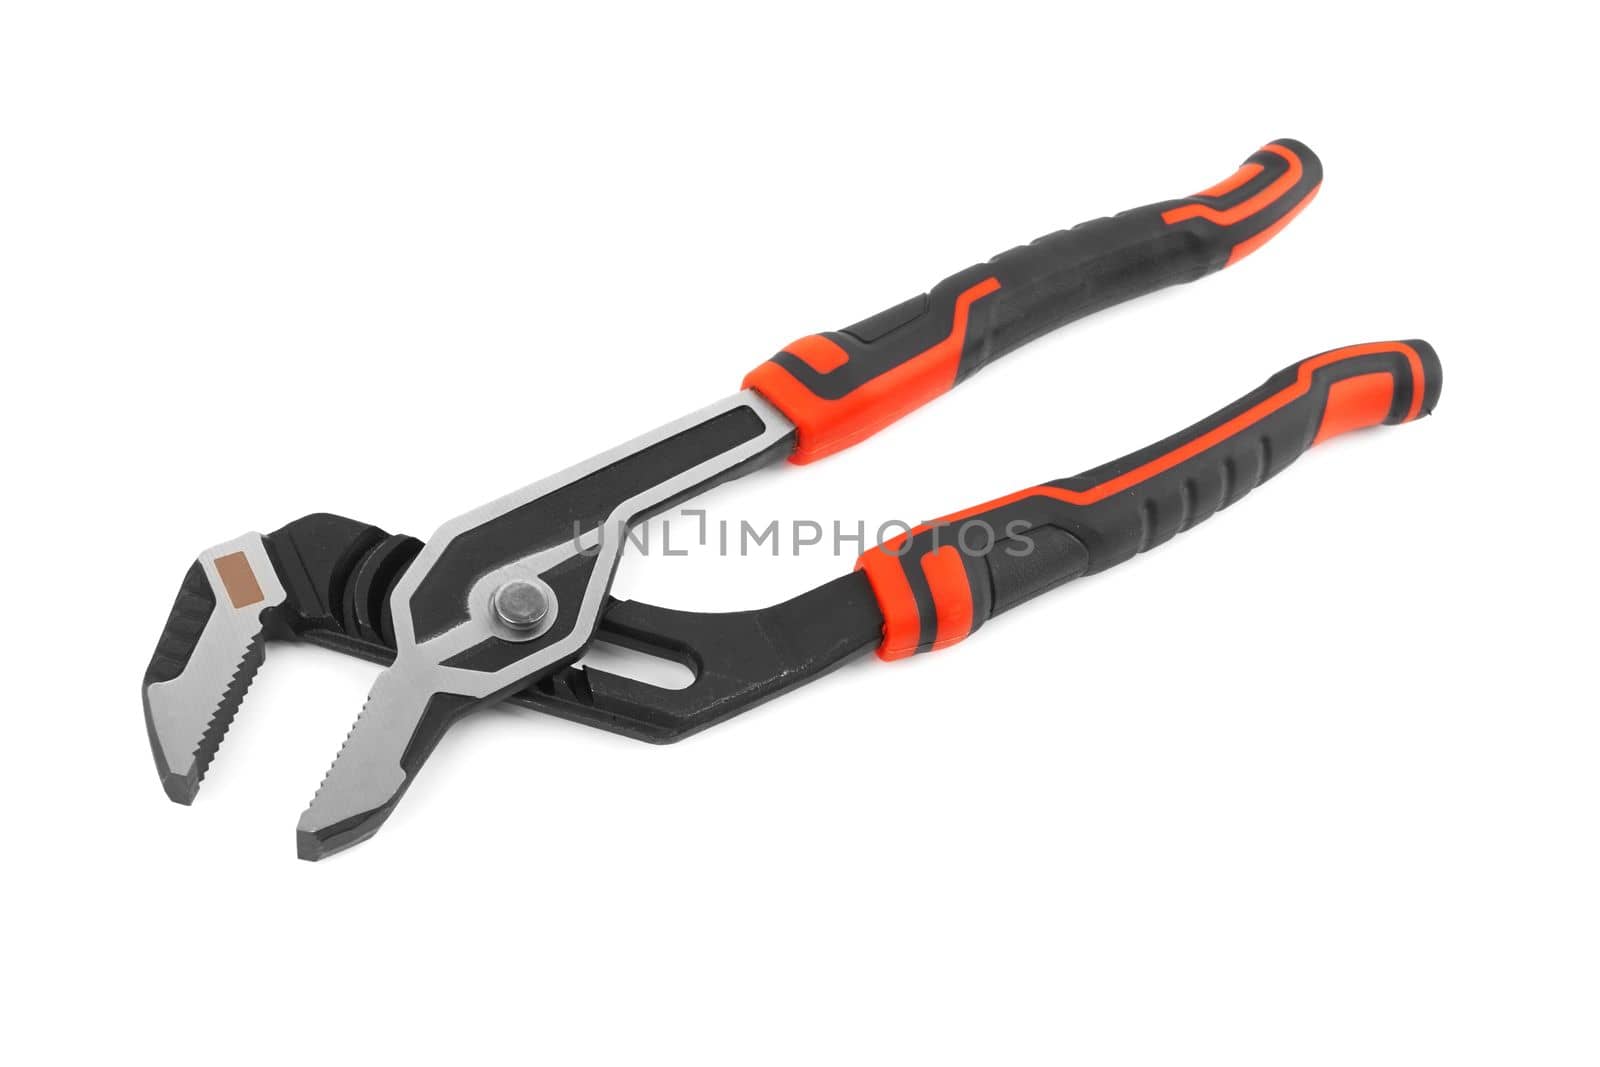 Slip joint pliers isolated by pioneer111